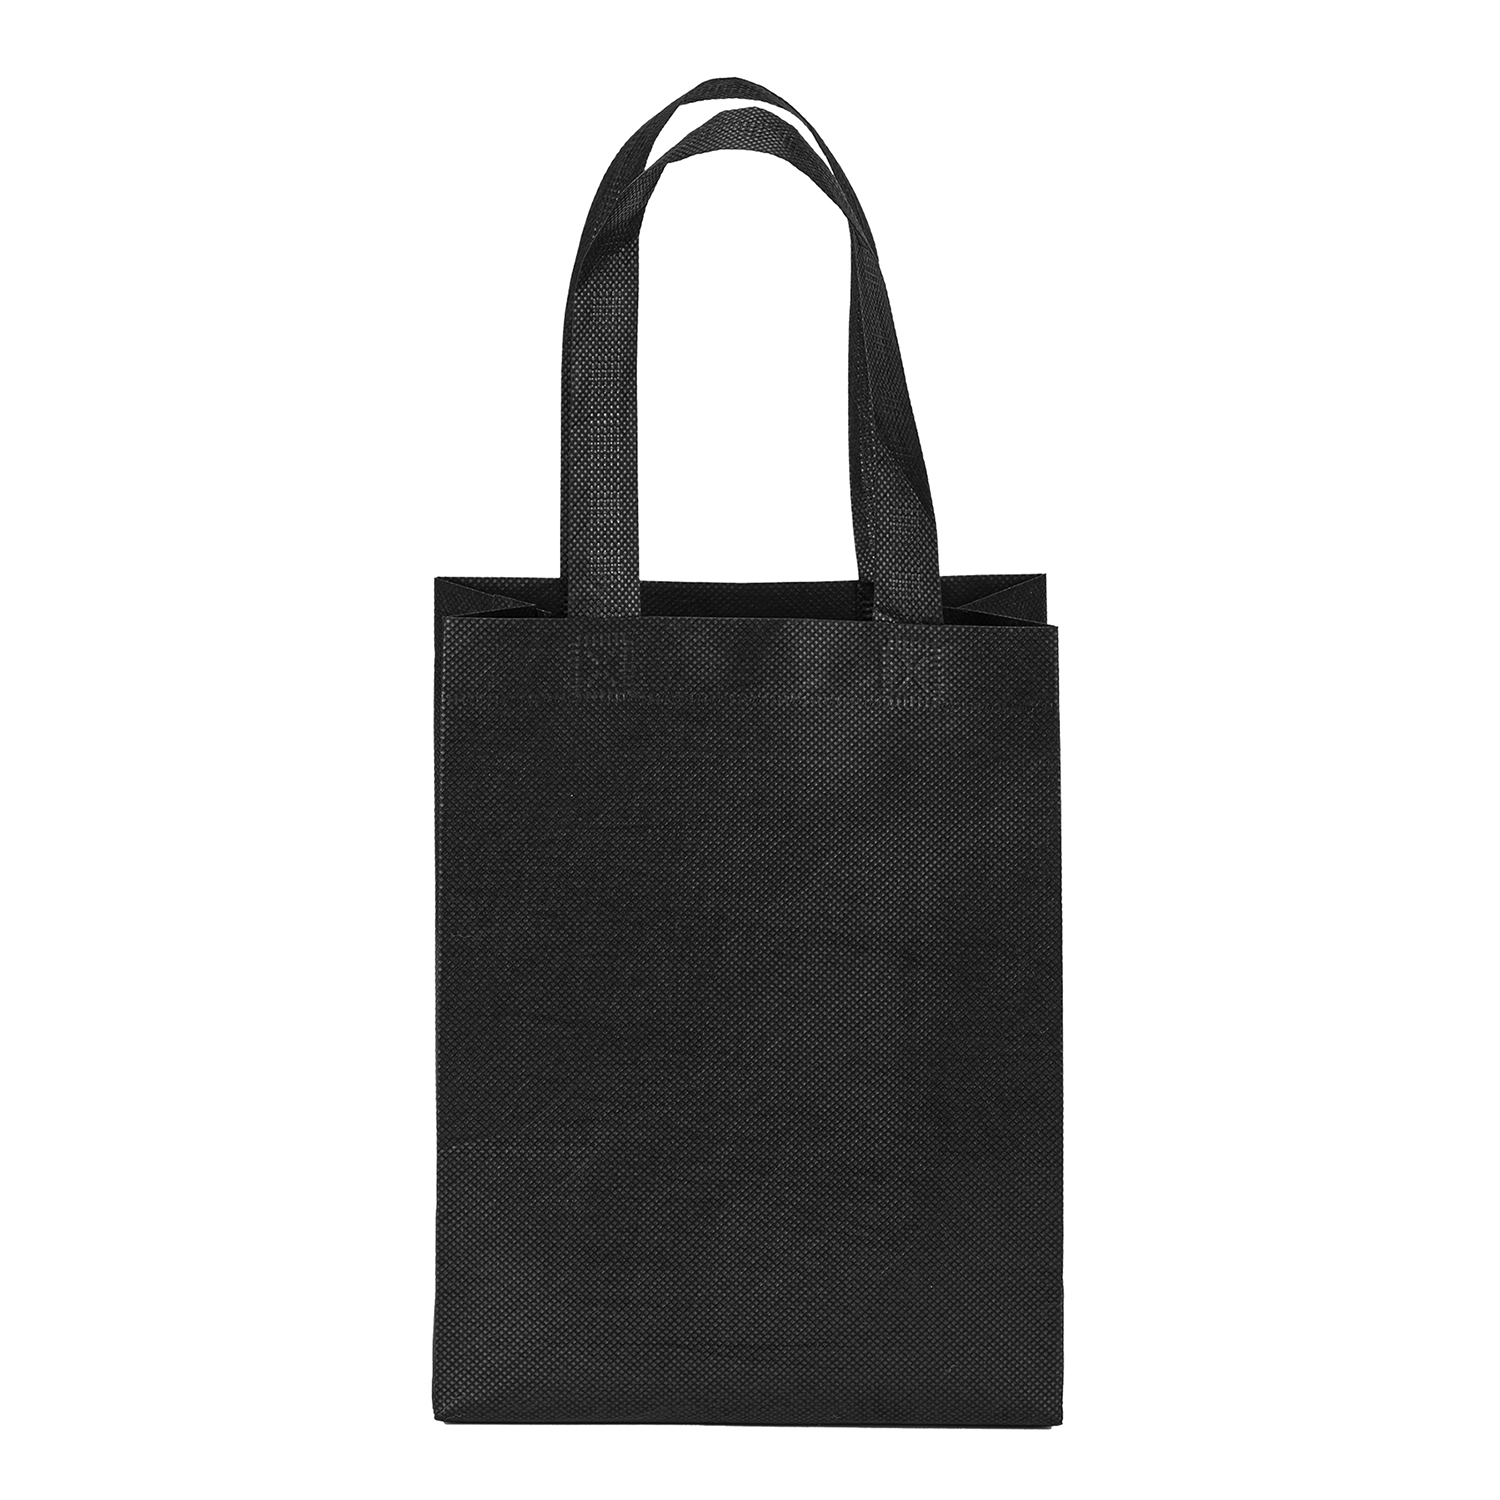 Bag Makers CVLA810 - Custom Printed Eco-Friendly Promotional Non-Woven Grocery Tote Bag